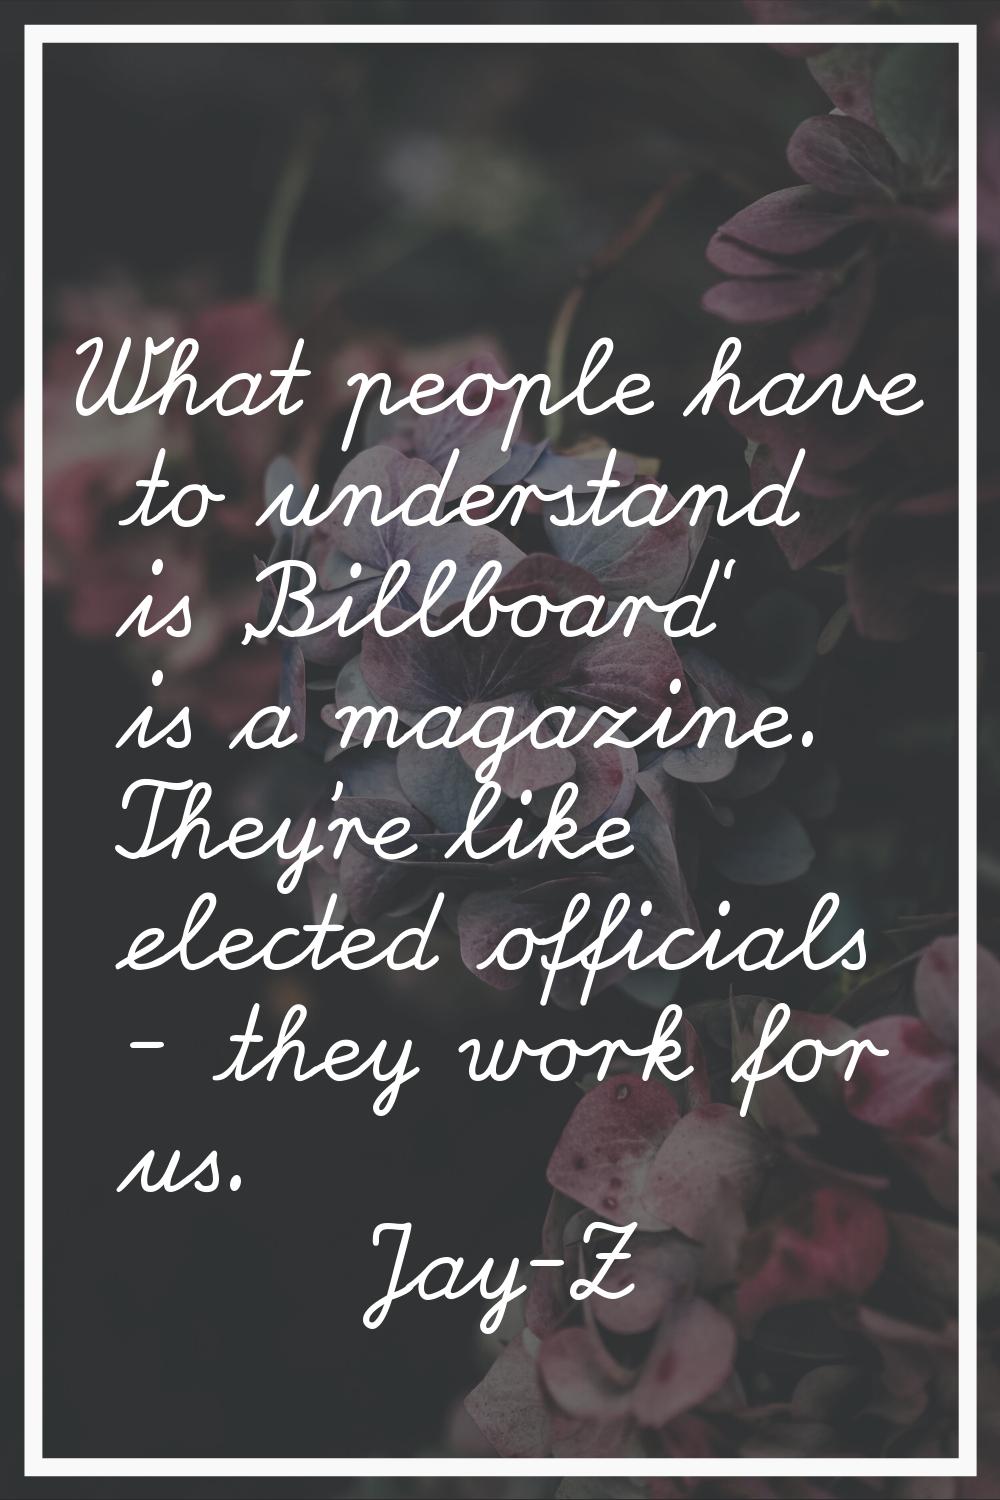 What people have to understand is 'Billboard' is a magazine. They're like elected officials - they 